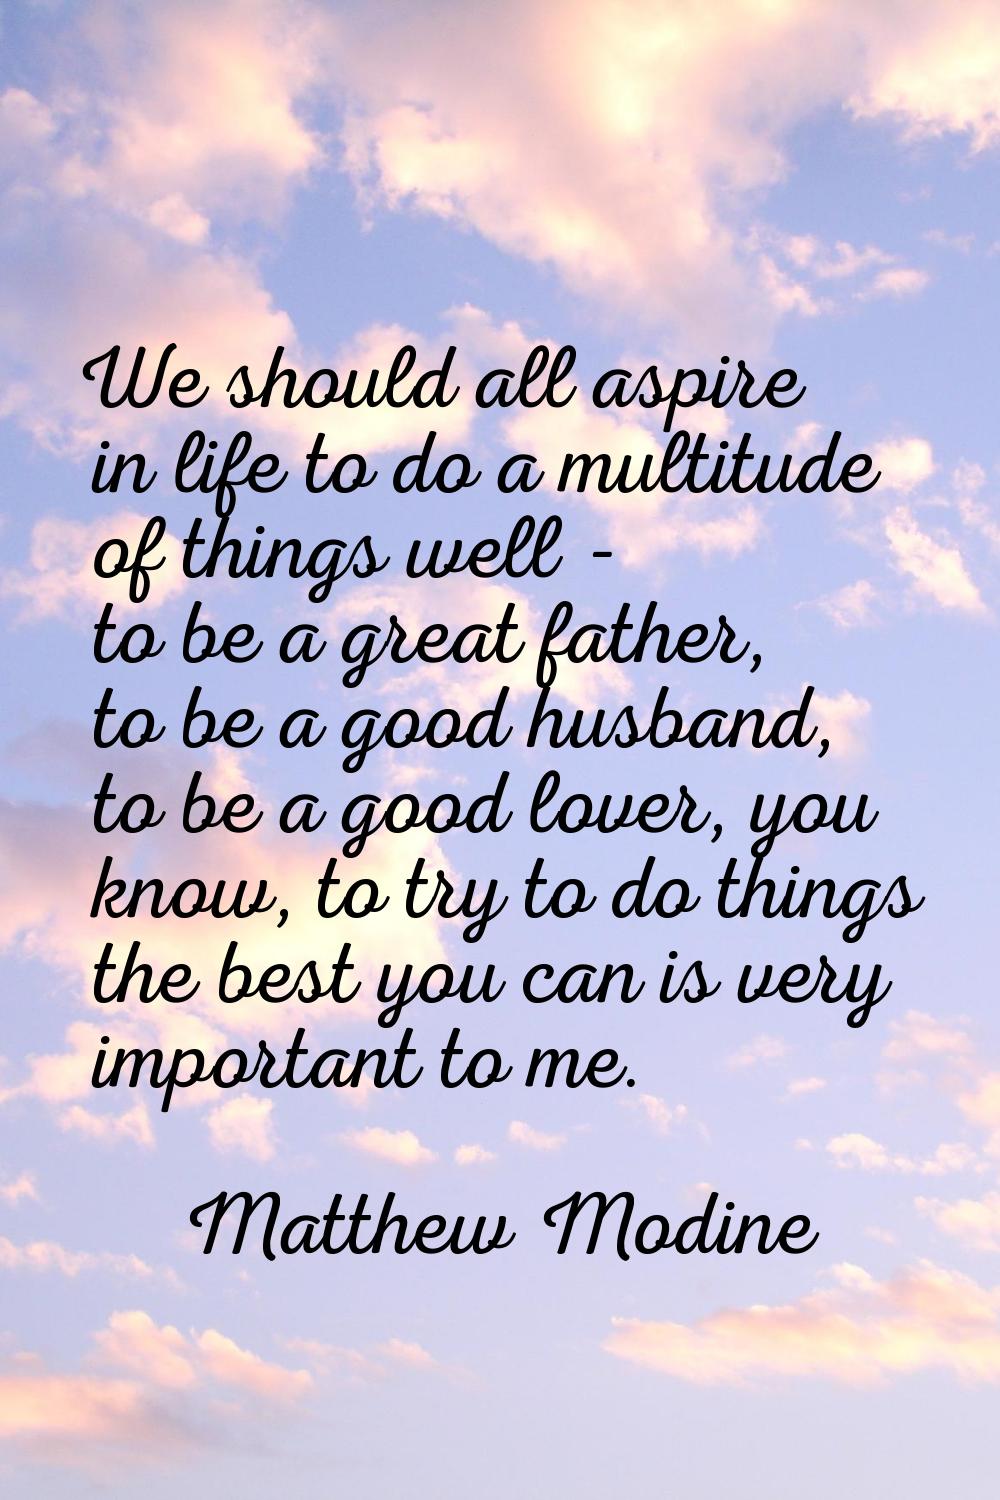 We should all aspire in life to do a multitude of things well - to be a great father, to be a good 